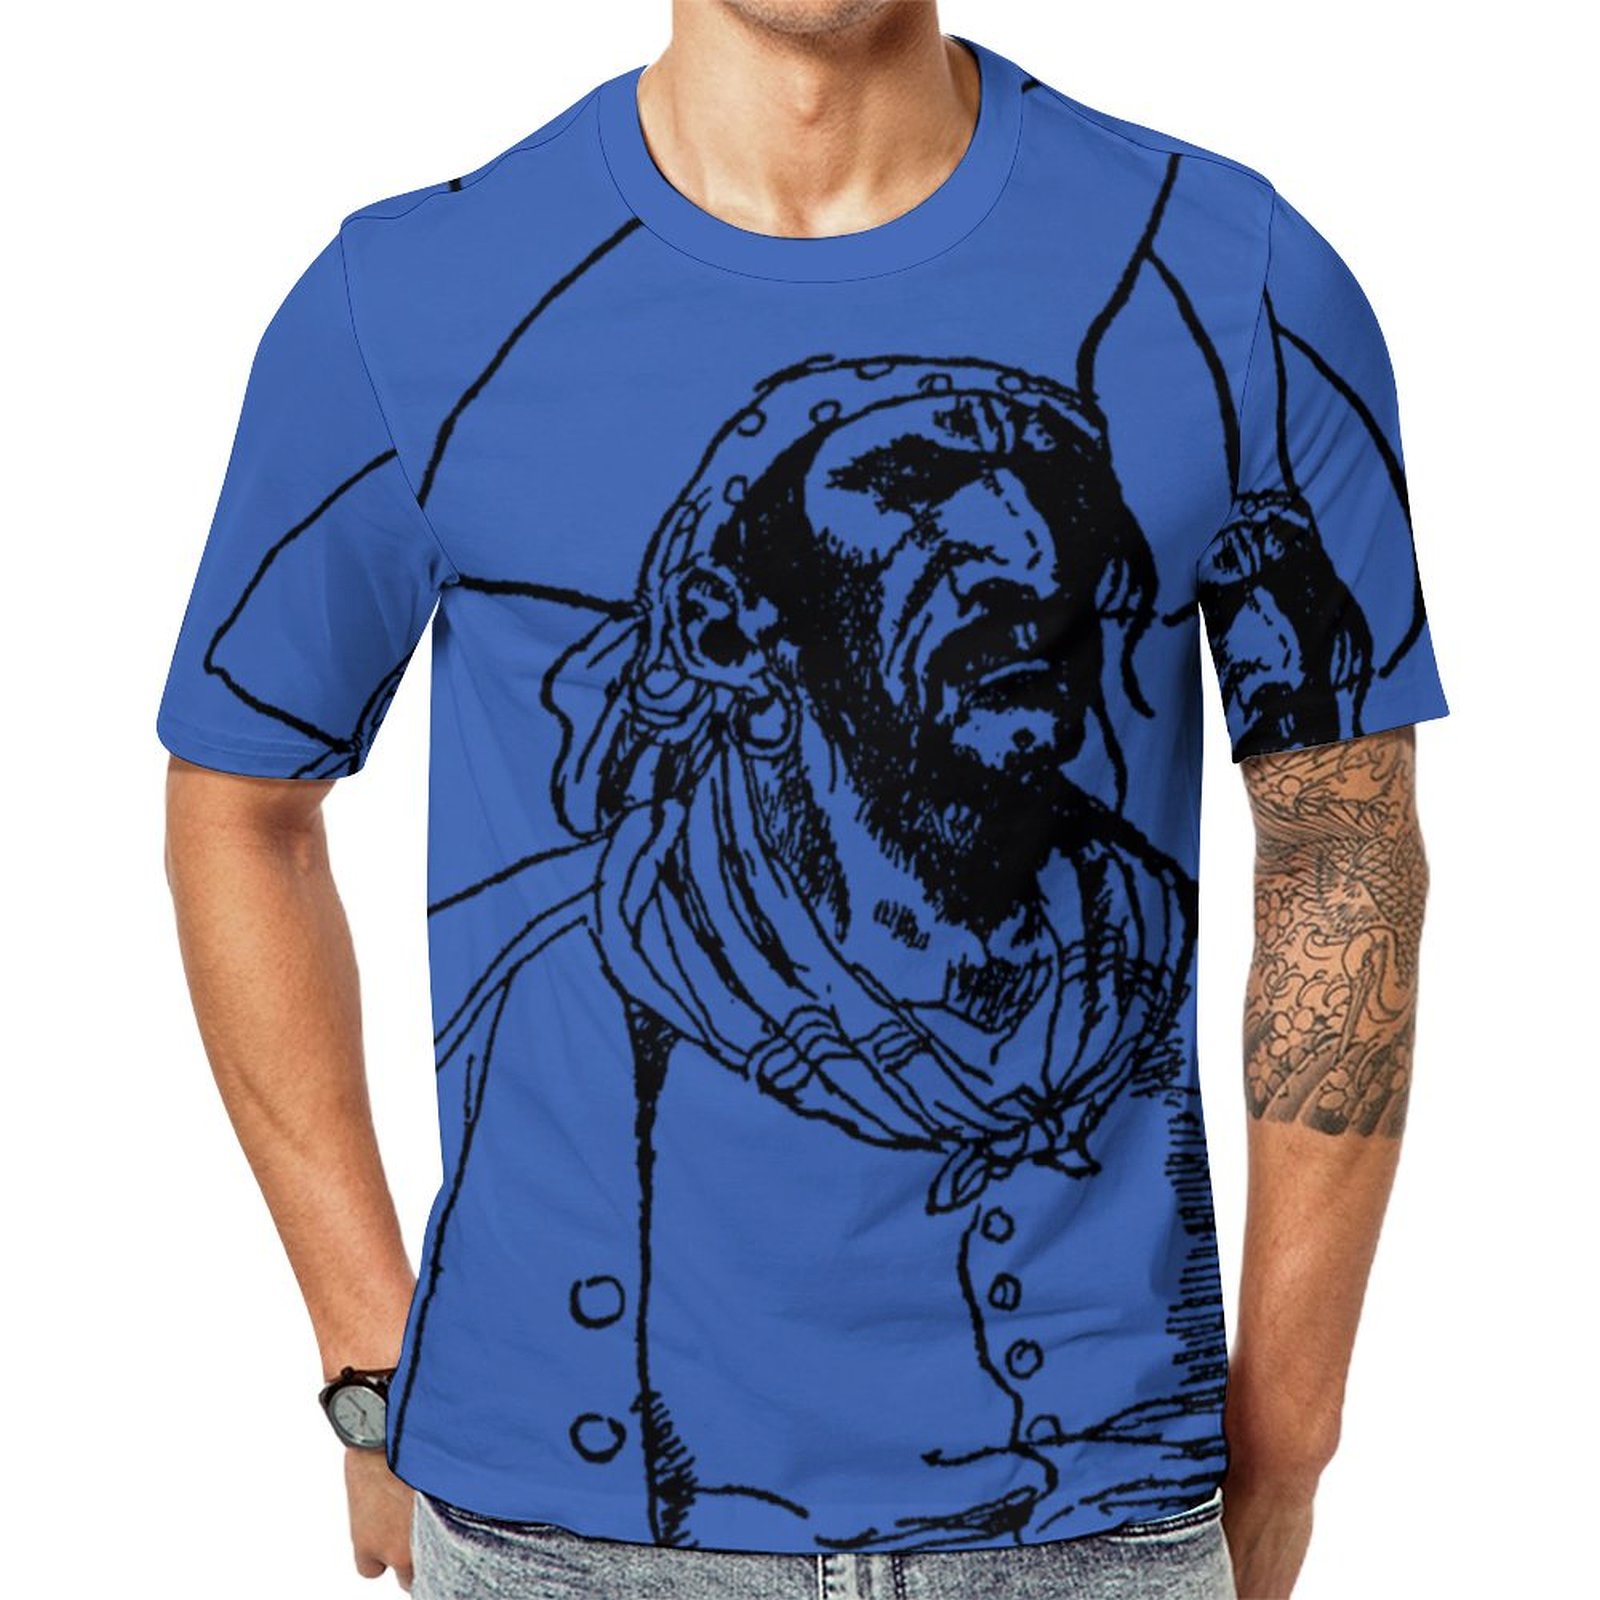 Vintage Pirates A Buccaneer Sketch By Howard Pyle Short Sleeve Print Unisex Tshirt Summer Casual Tees for Men and Women Coolcoshirts